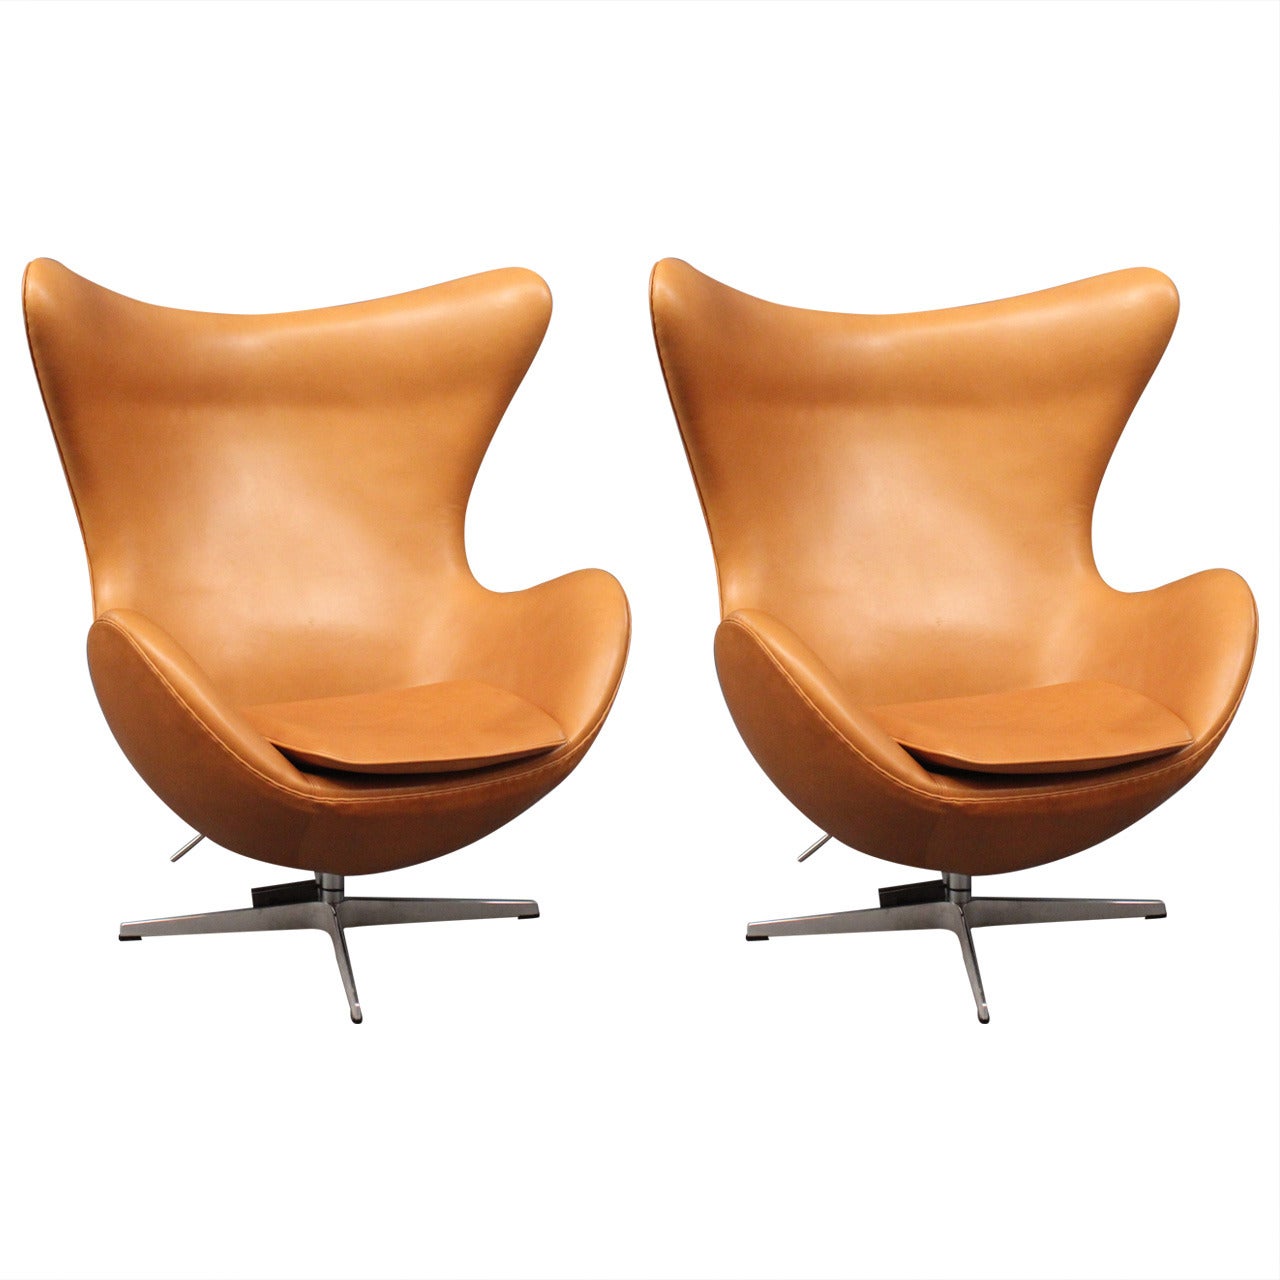 The Egg, model 3316, by Arne Jacobsen, and by Fritz Hansen